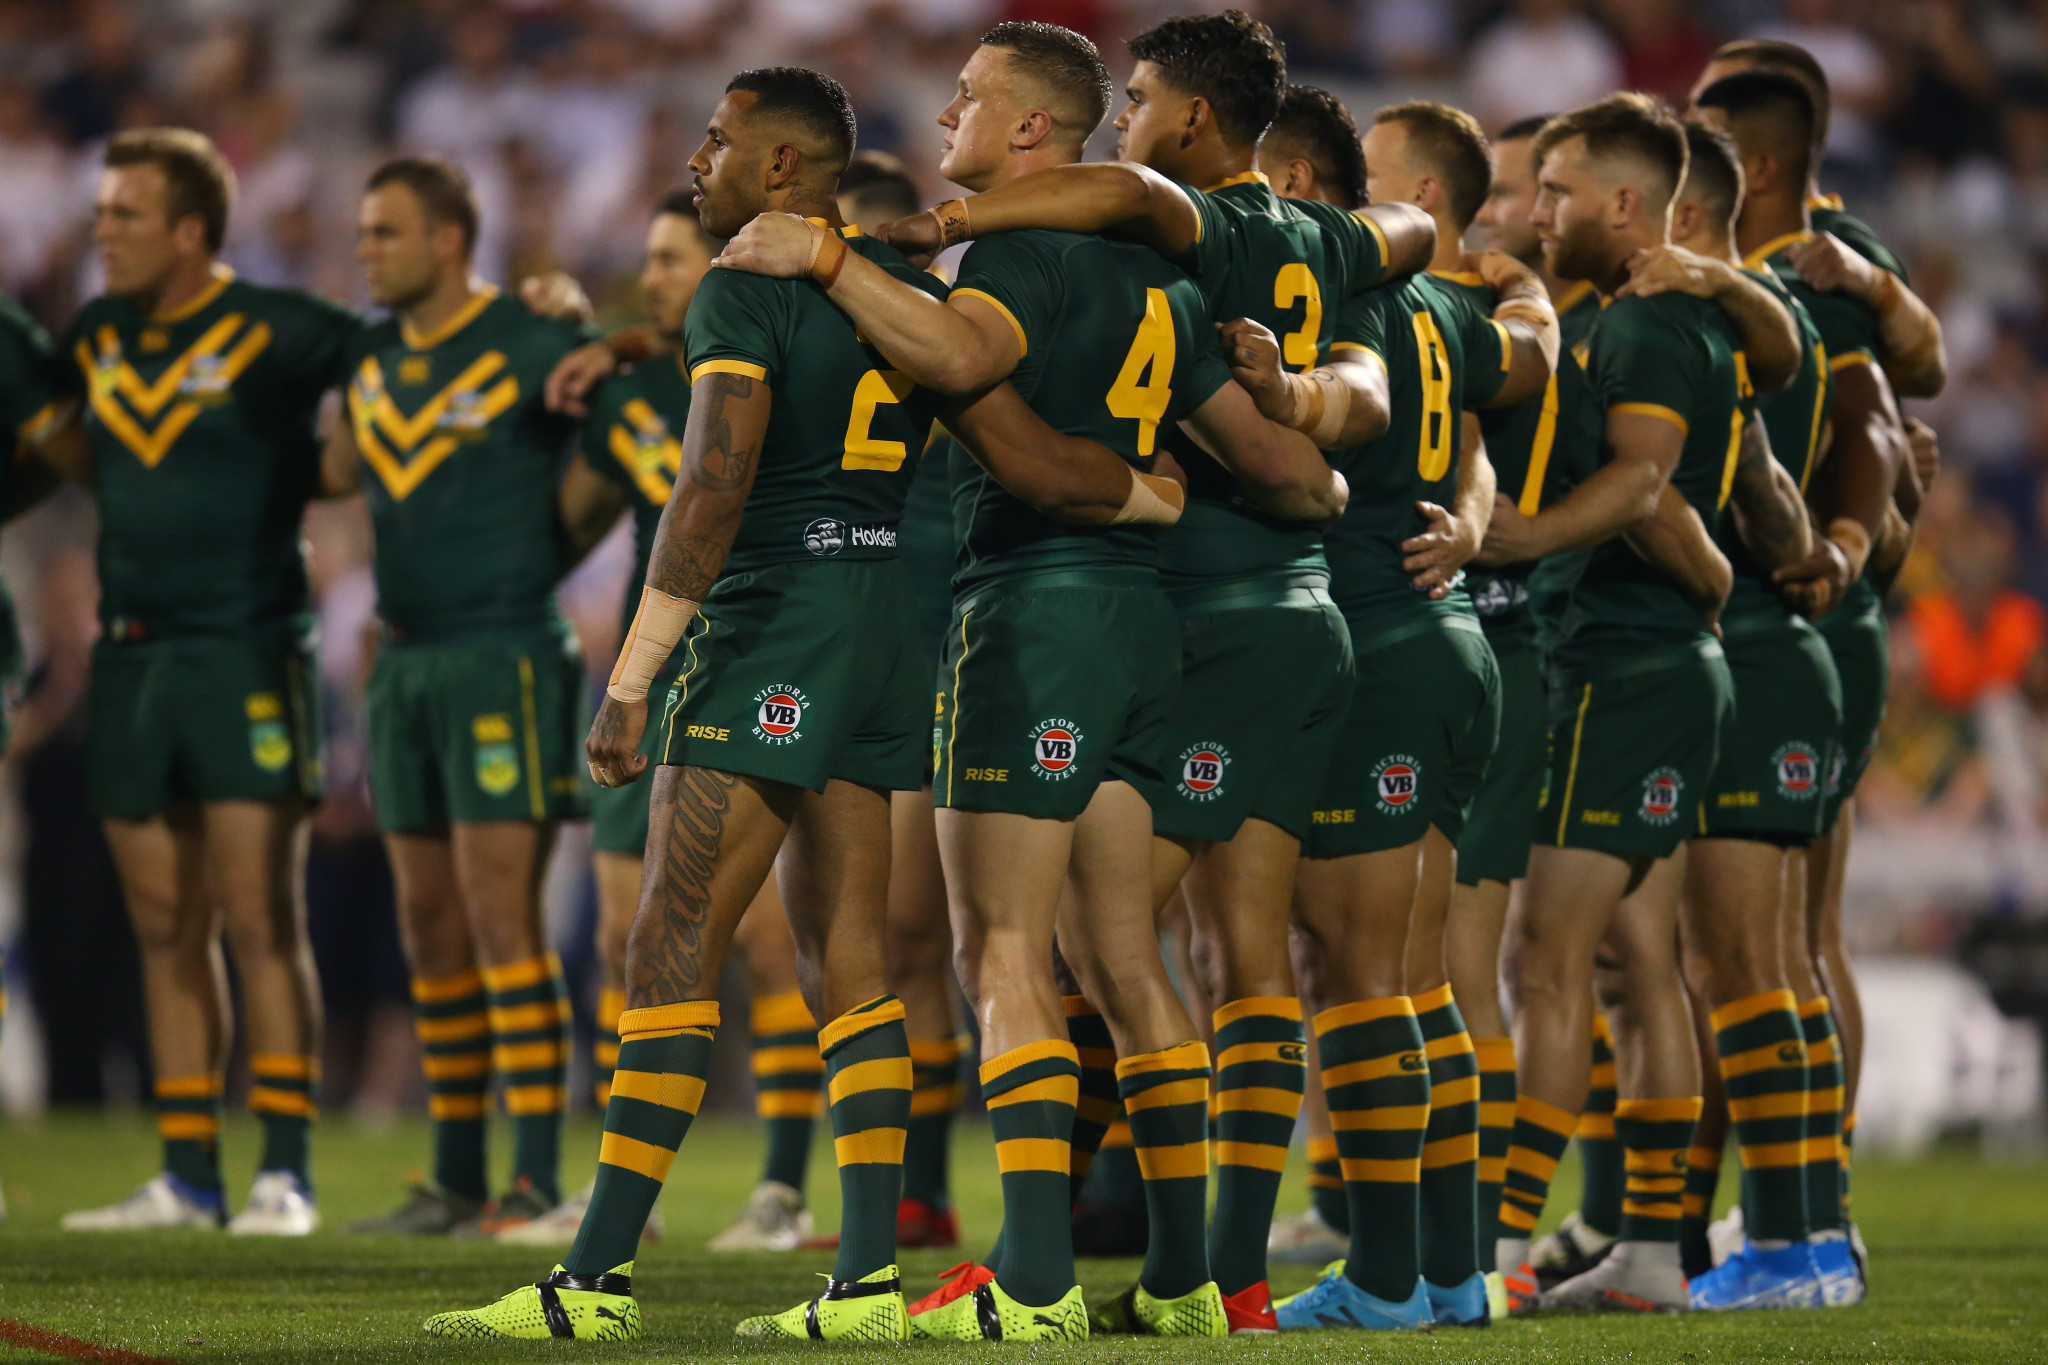 Australia rugby league coach Mal Meninga says he fully supports a hybrid cross-code rugby match between teams from Australia and New Zealand ©Getty Images